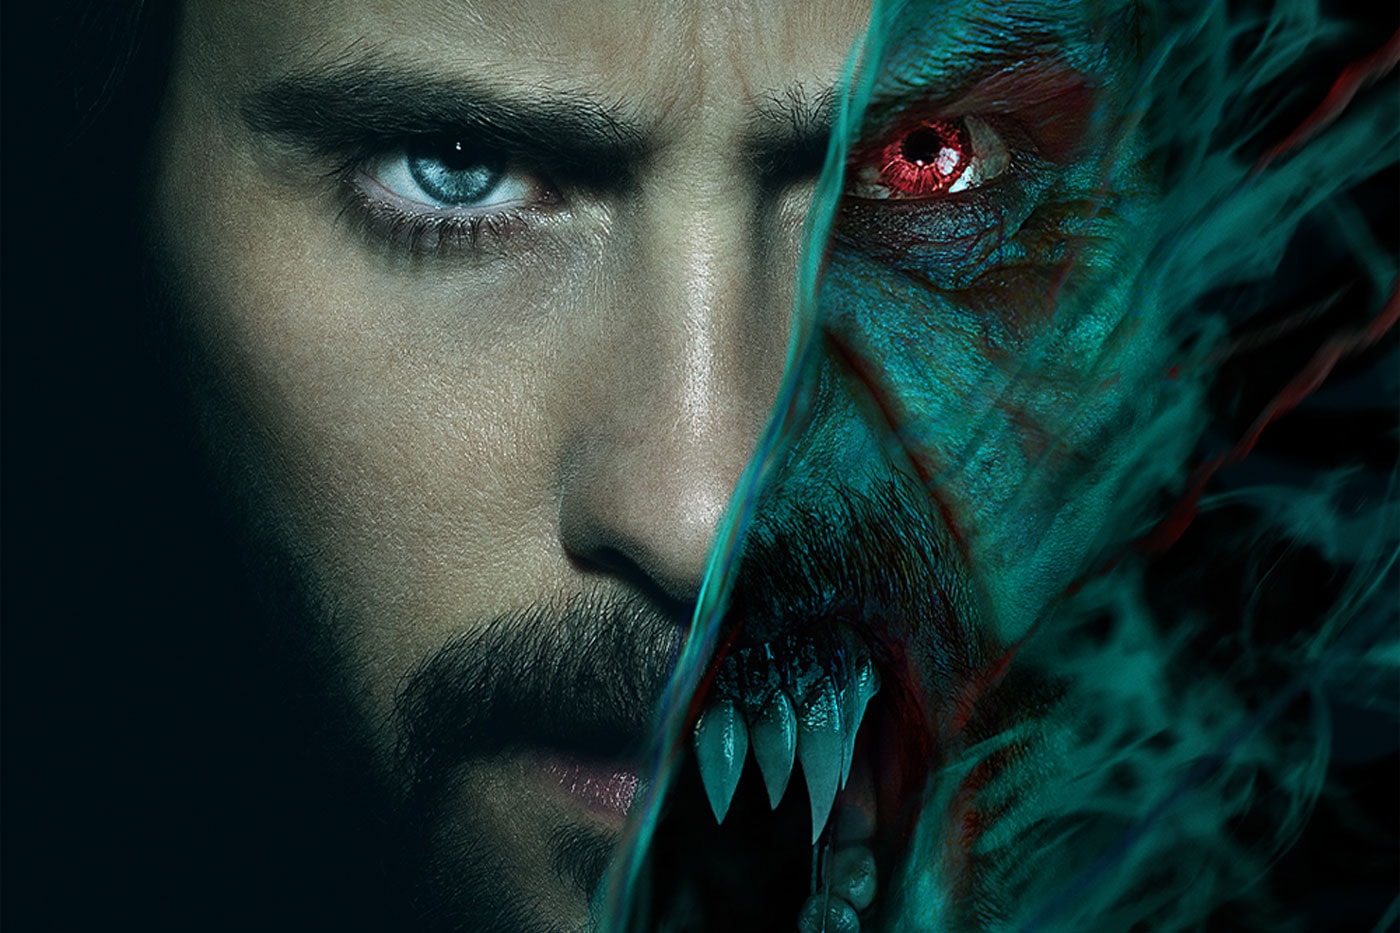 New 'Morbius' Teaser Trailer Focuses on Jared Leto's Journey To Find a Cure tom hardy venom dr. michael morbius living vampire 